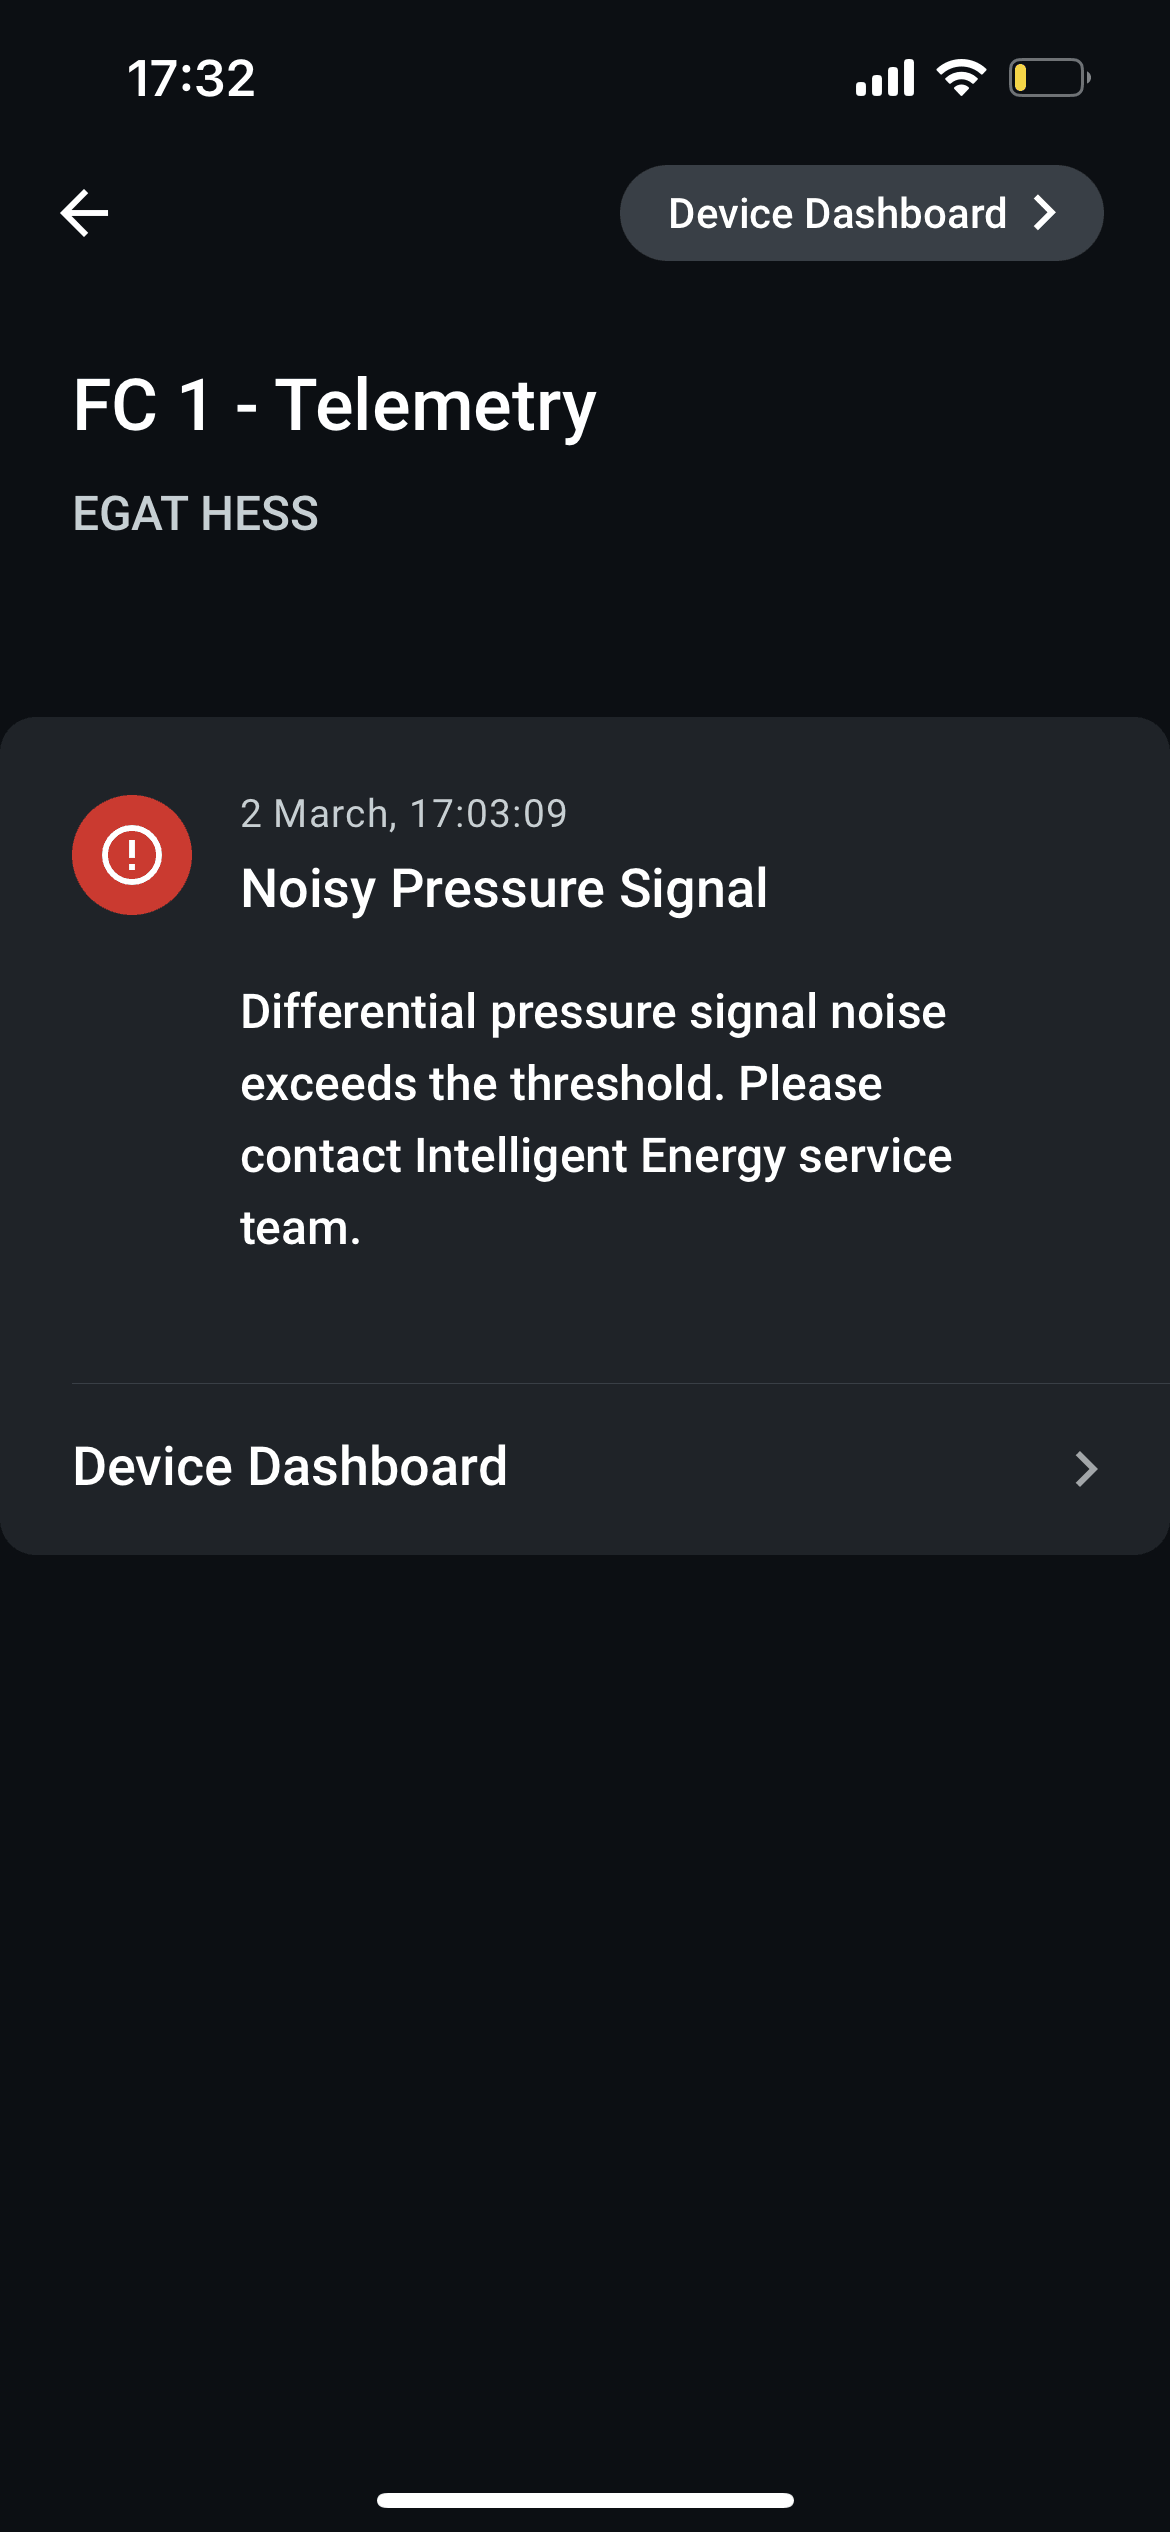 Issue screen shows detailed information about alert and possible resolution steps if any.